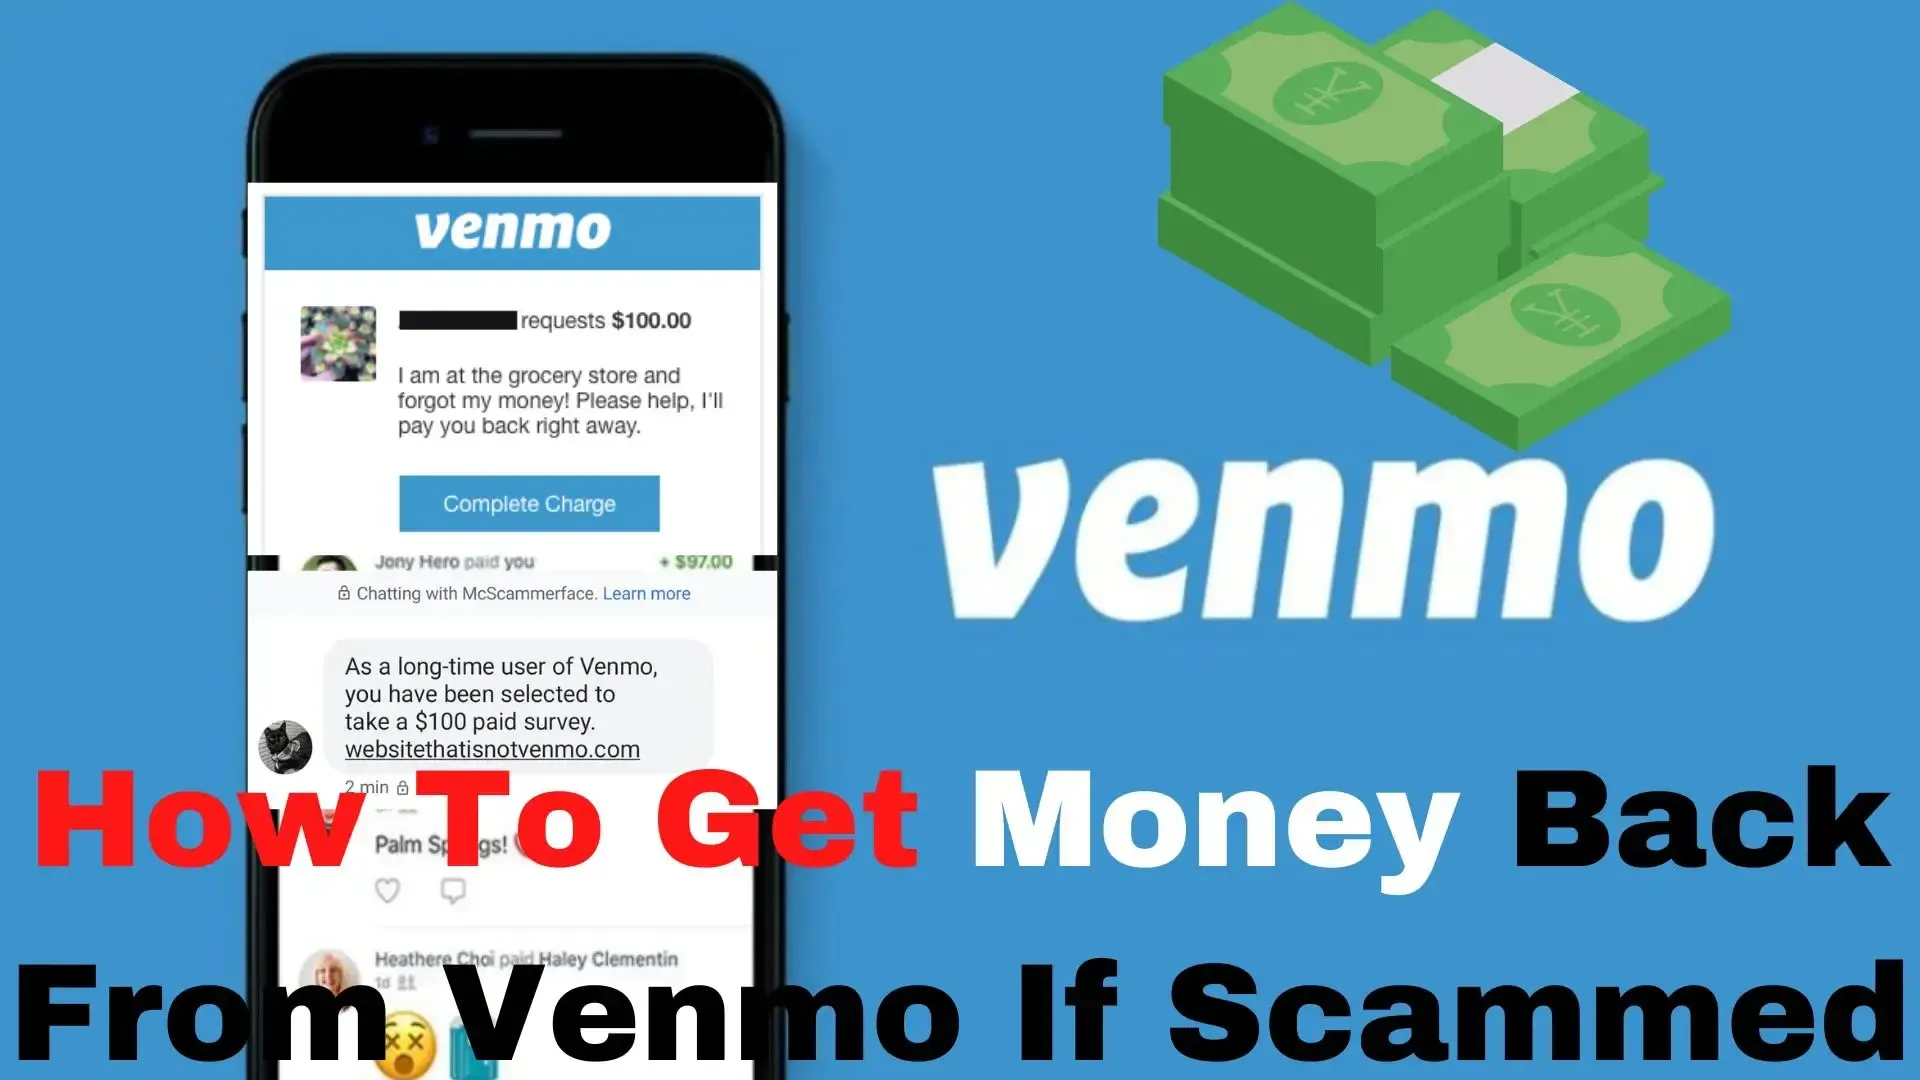 Get Money Back From Venmo If Scammed